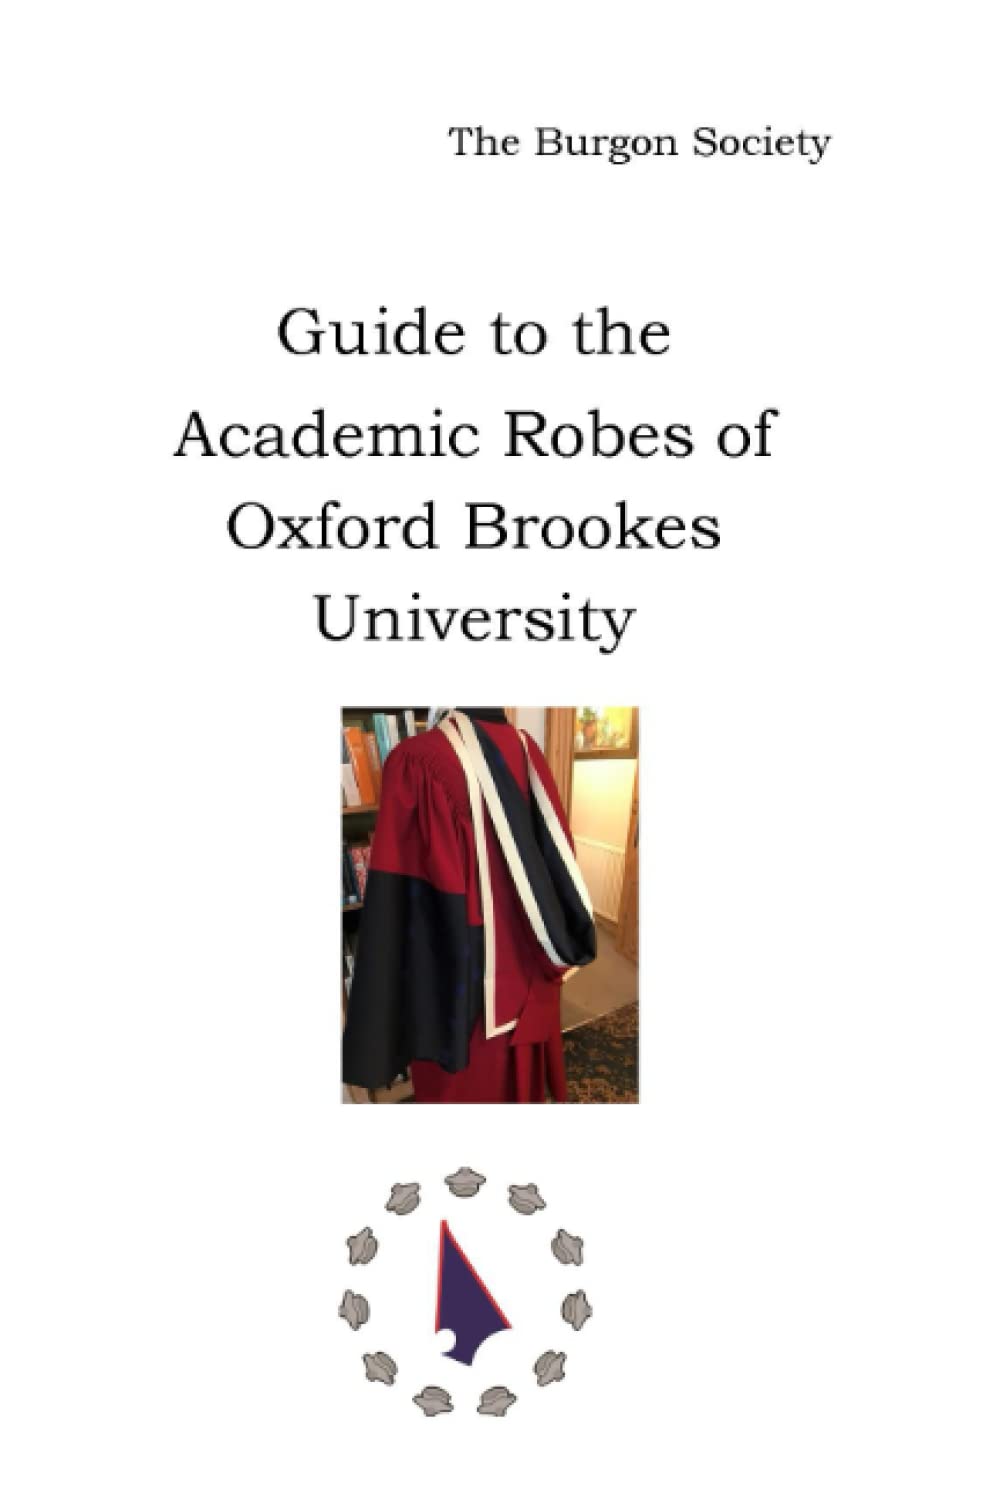 A Guide to the Academic Dress of Oxford Brookes University